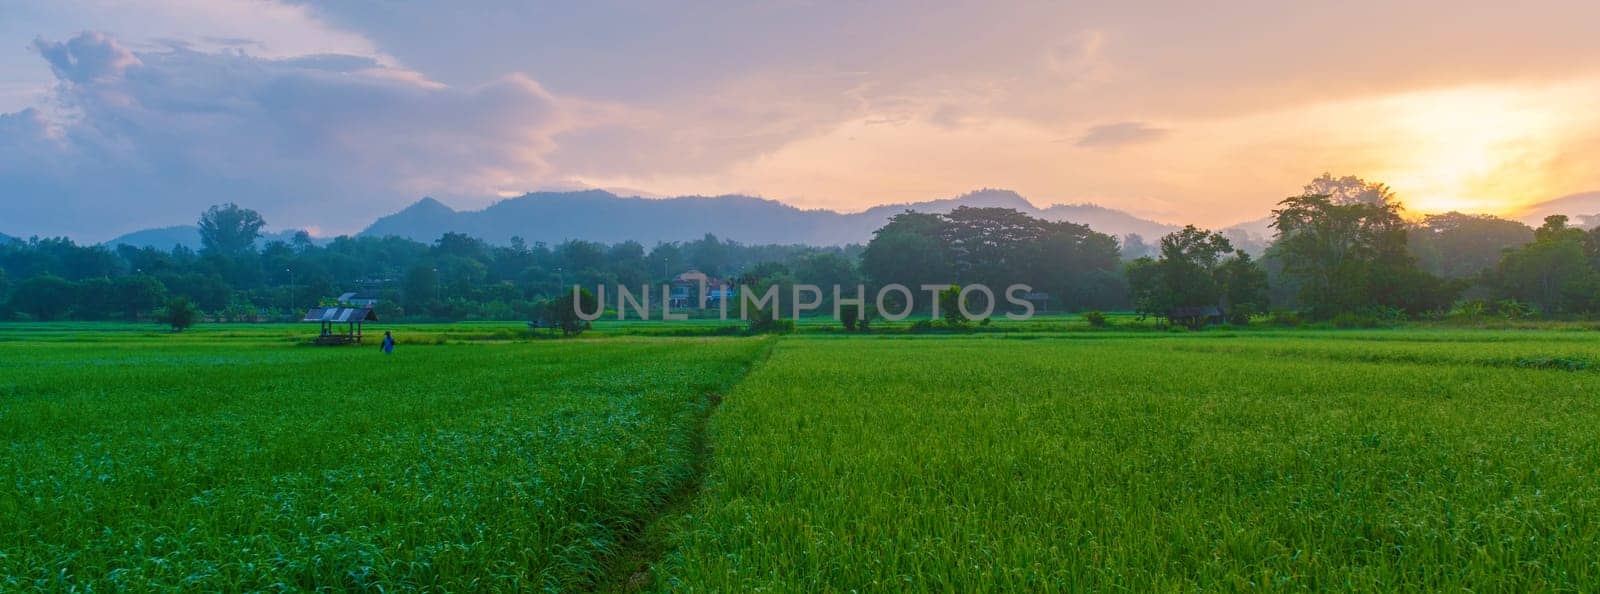 sunset over the green rice fields of central Thailand, green rice paddy field